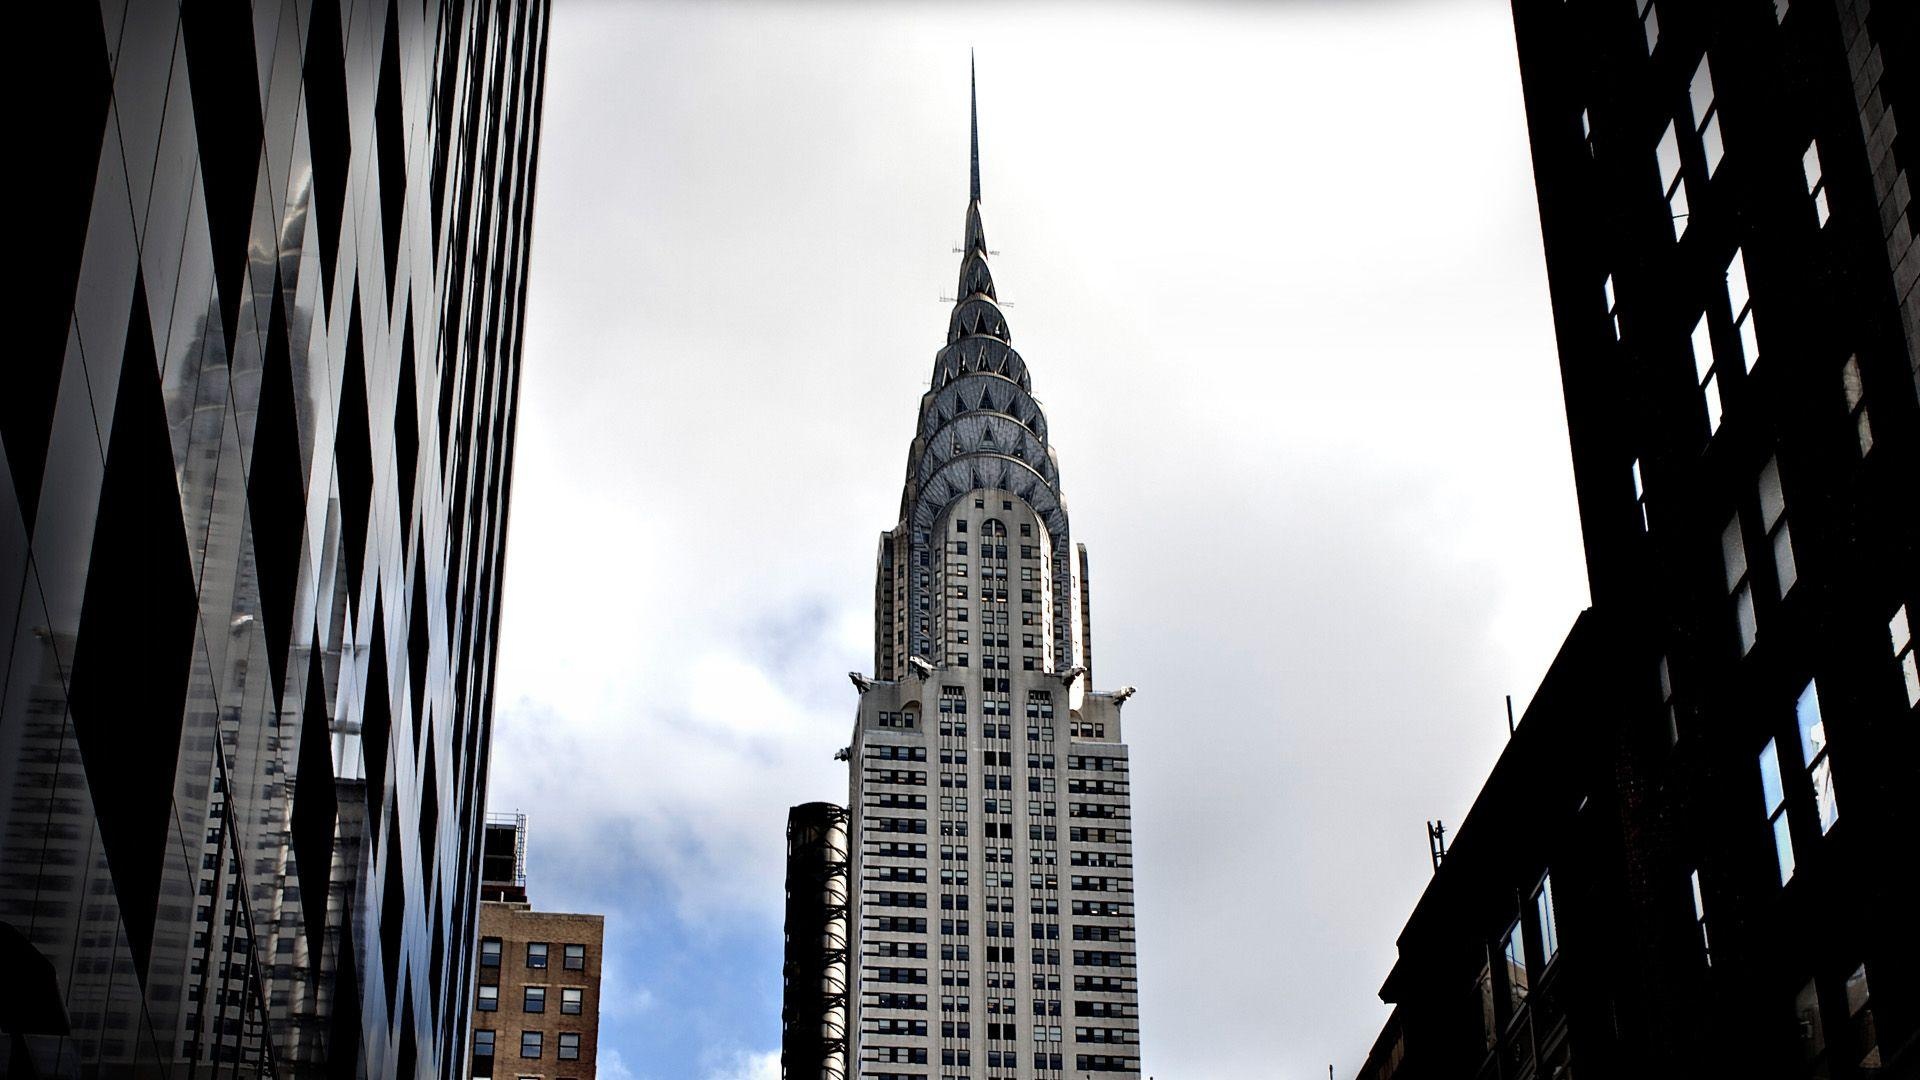 Chrysler Building: The 31st-floor contains gargoyles and the 61st-floor is adorned with eagles. 1920x1080 Full HD Background.